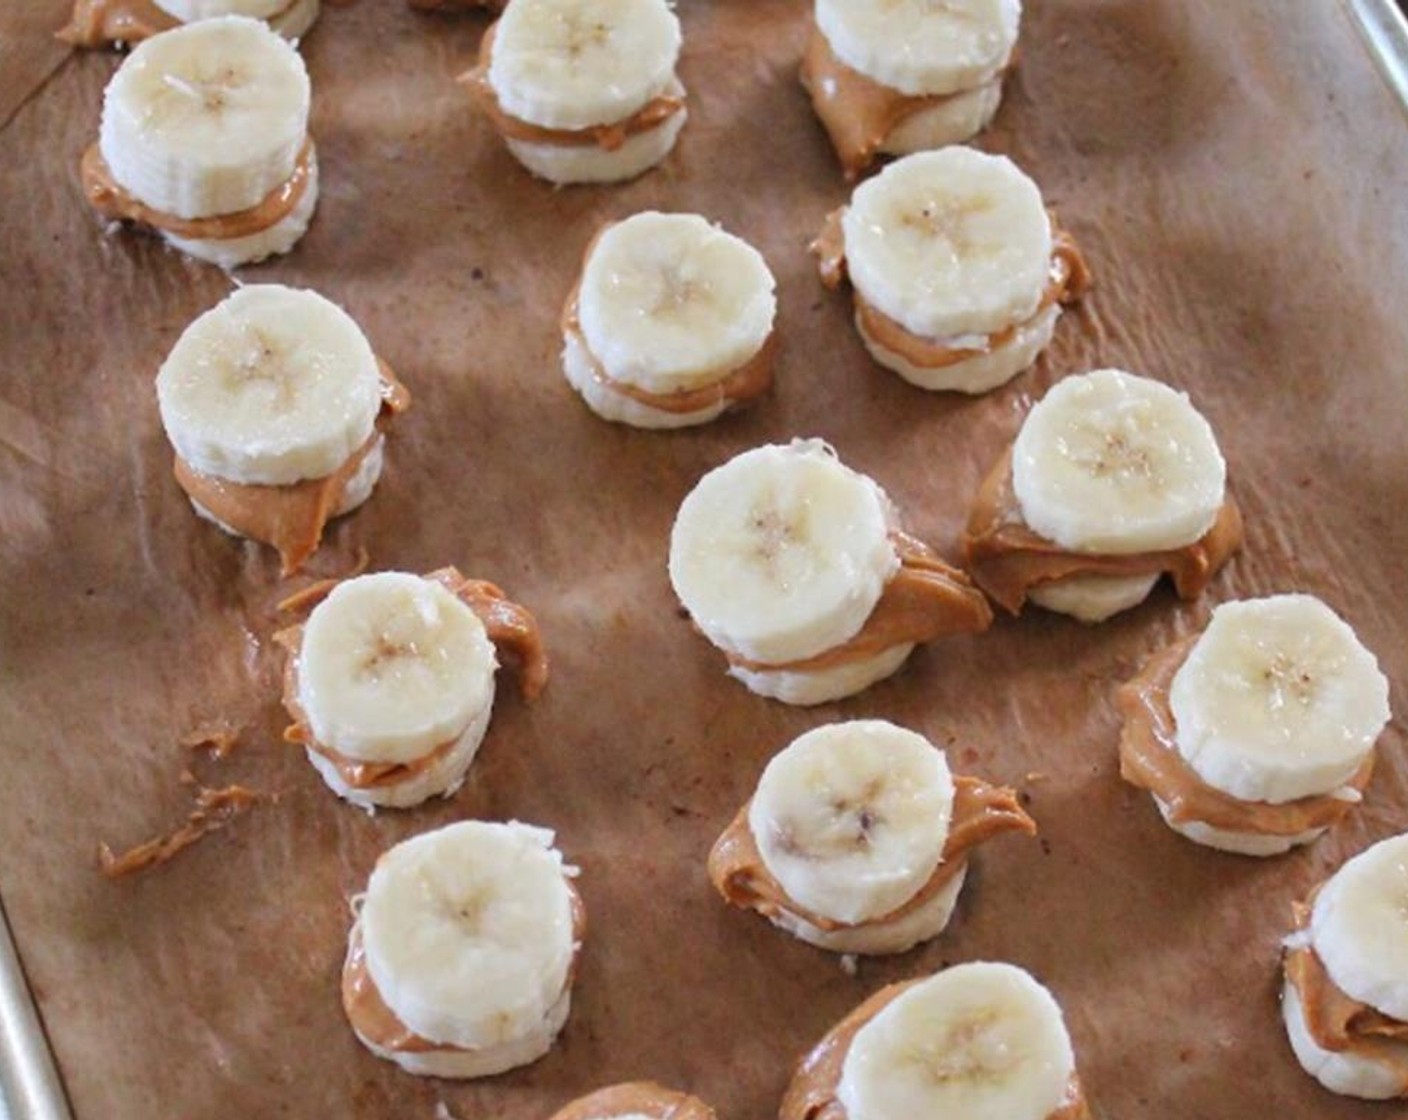 step 1 Place Bananas (3) on a baking tray. Spoon out about 1/2 tablespoon of Peanut Butter (1/2 cup) on each. Place another slice of banana over the peanut butter to sandwich together. Repeat.